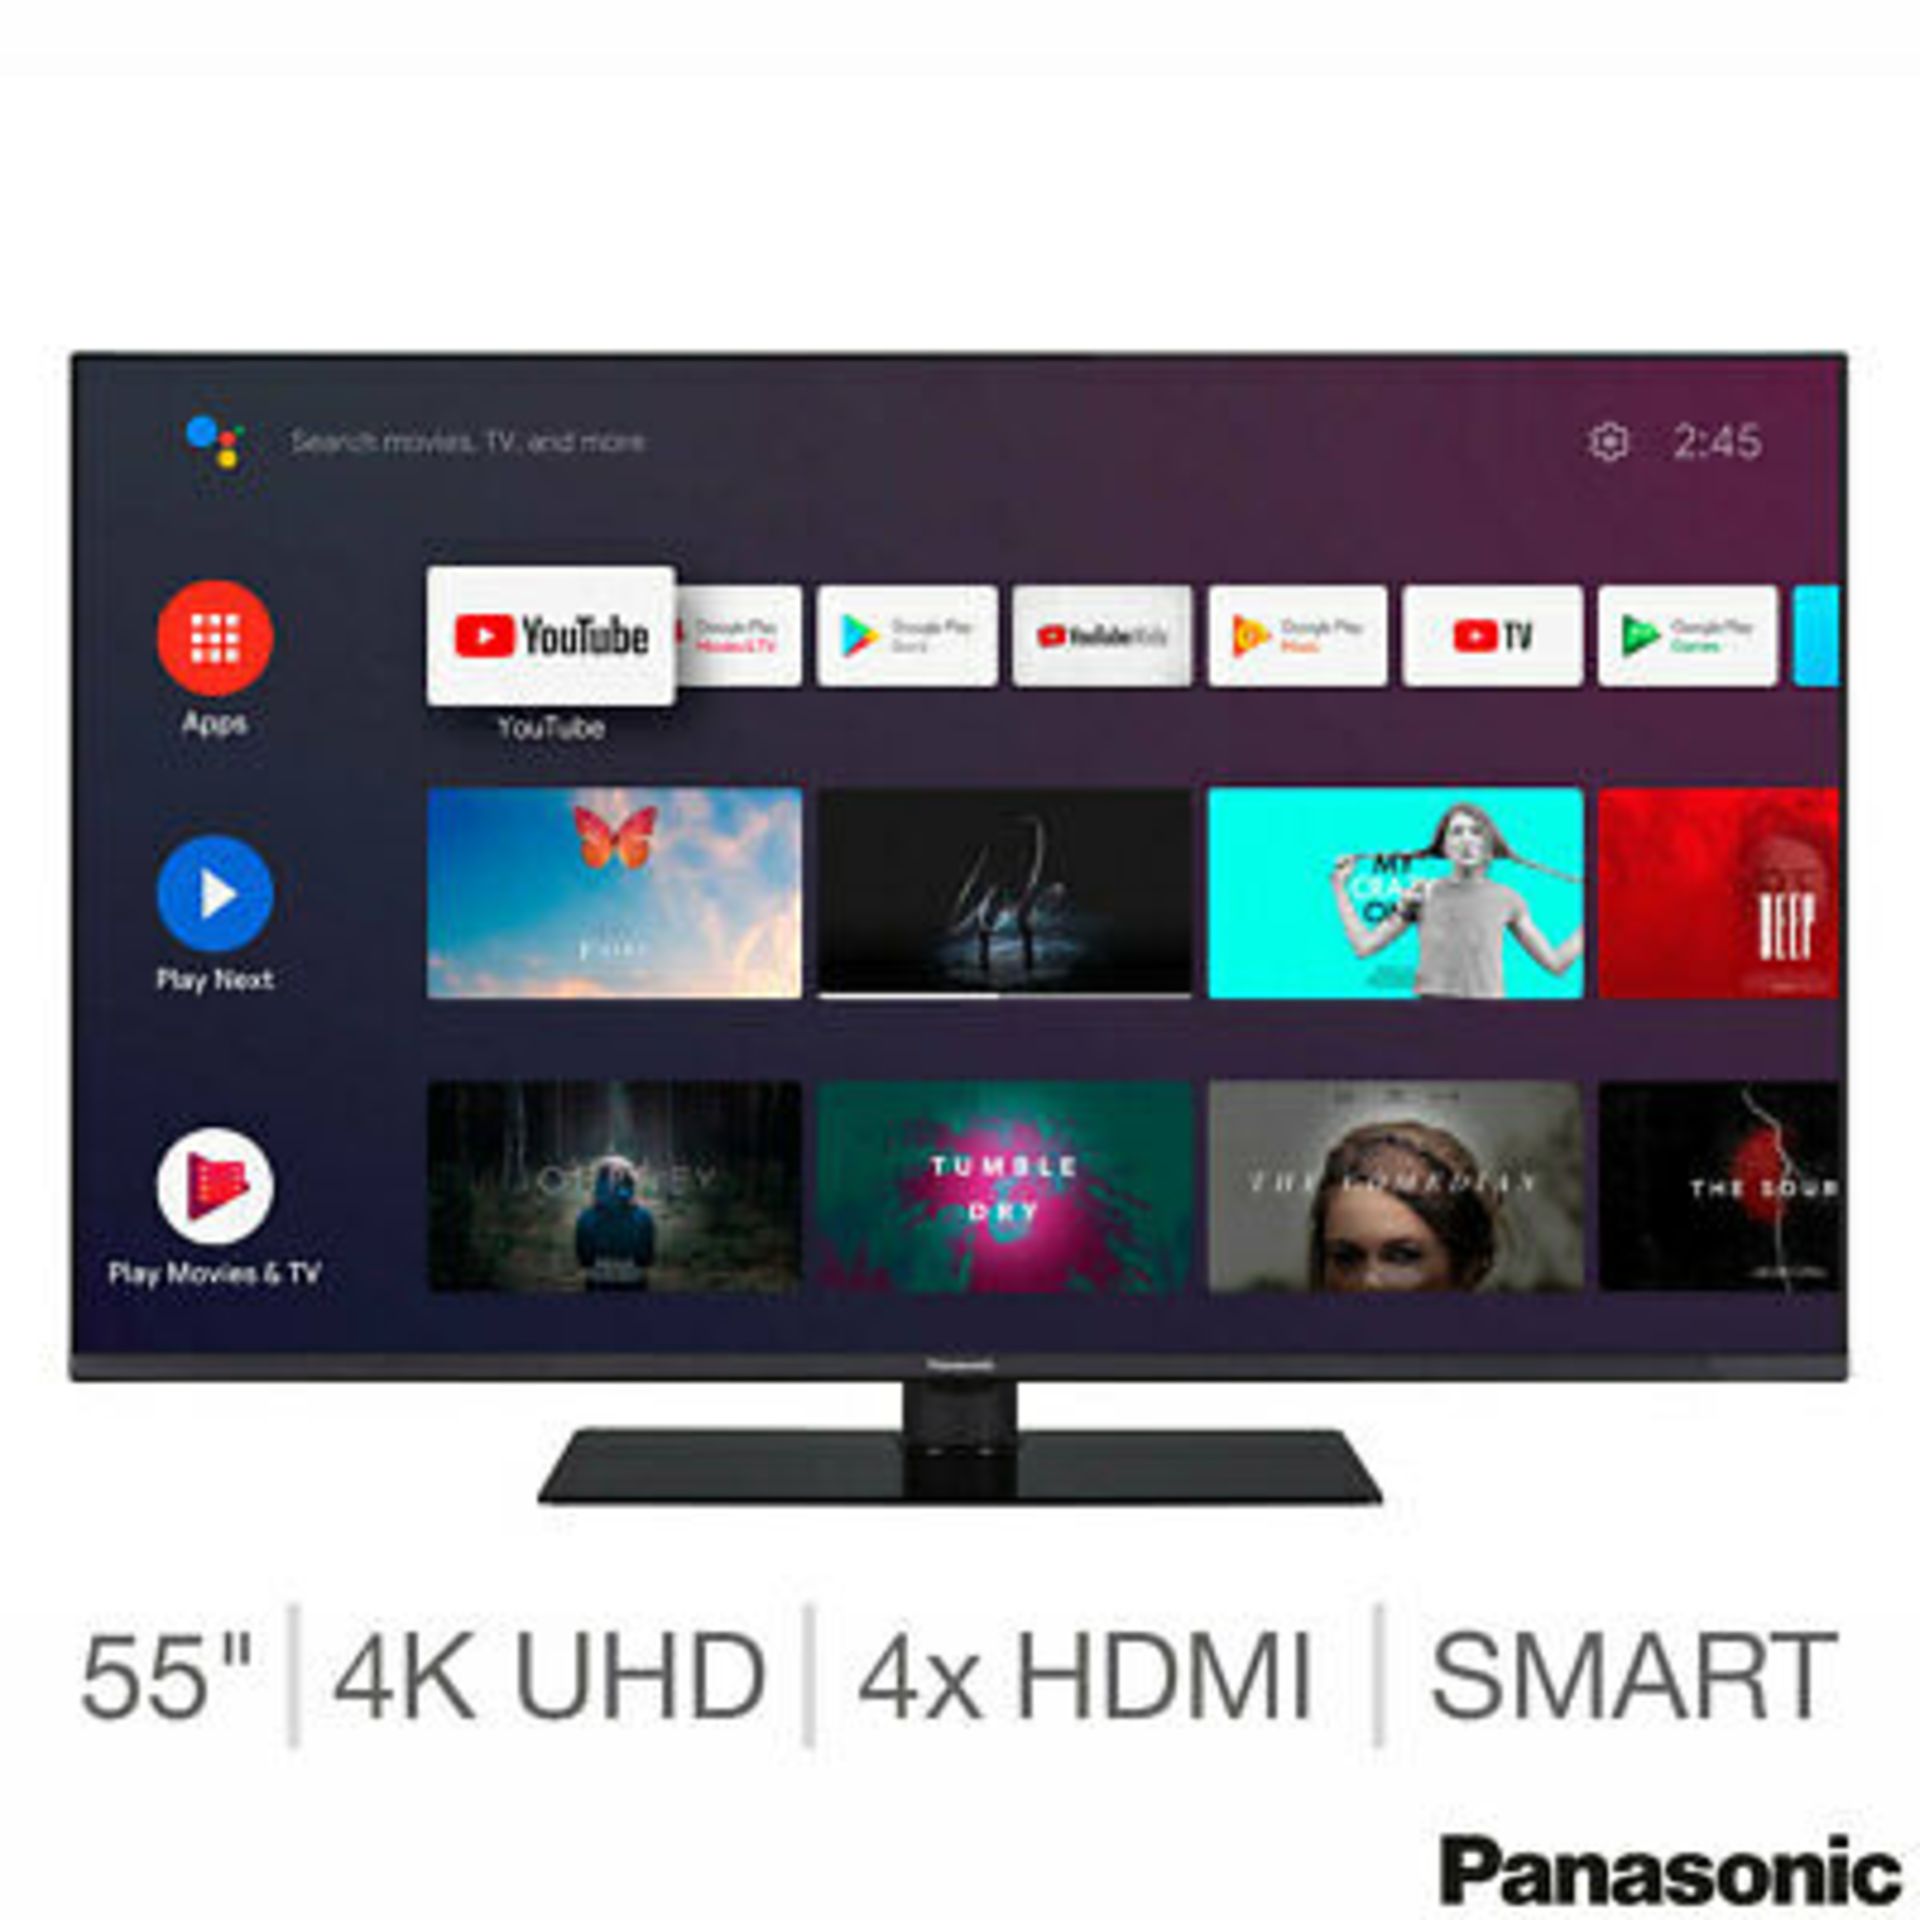 1 BOXED PANASONIC TX-55HX700BZ 55 INCH 4K ULTRA HD SMART ANDROID TV WITH STAND AND REMOTE RRP Â£499